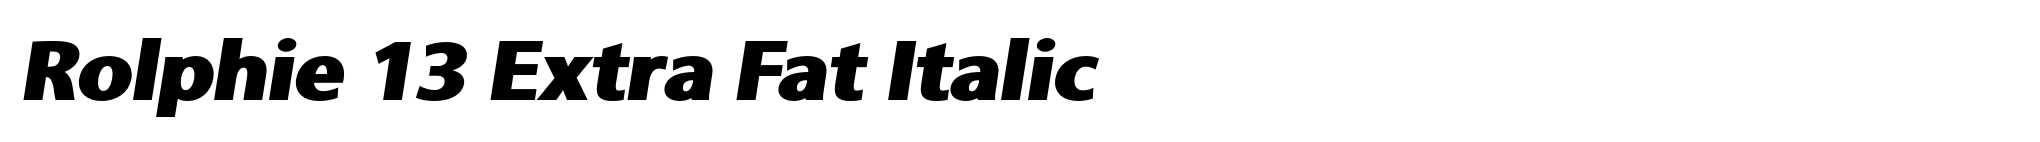 Rolphie 13 Extra Fat Italic image